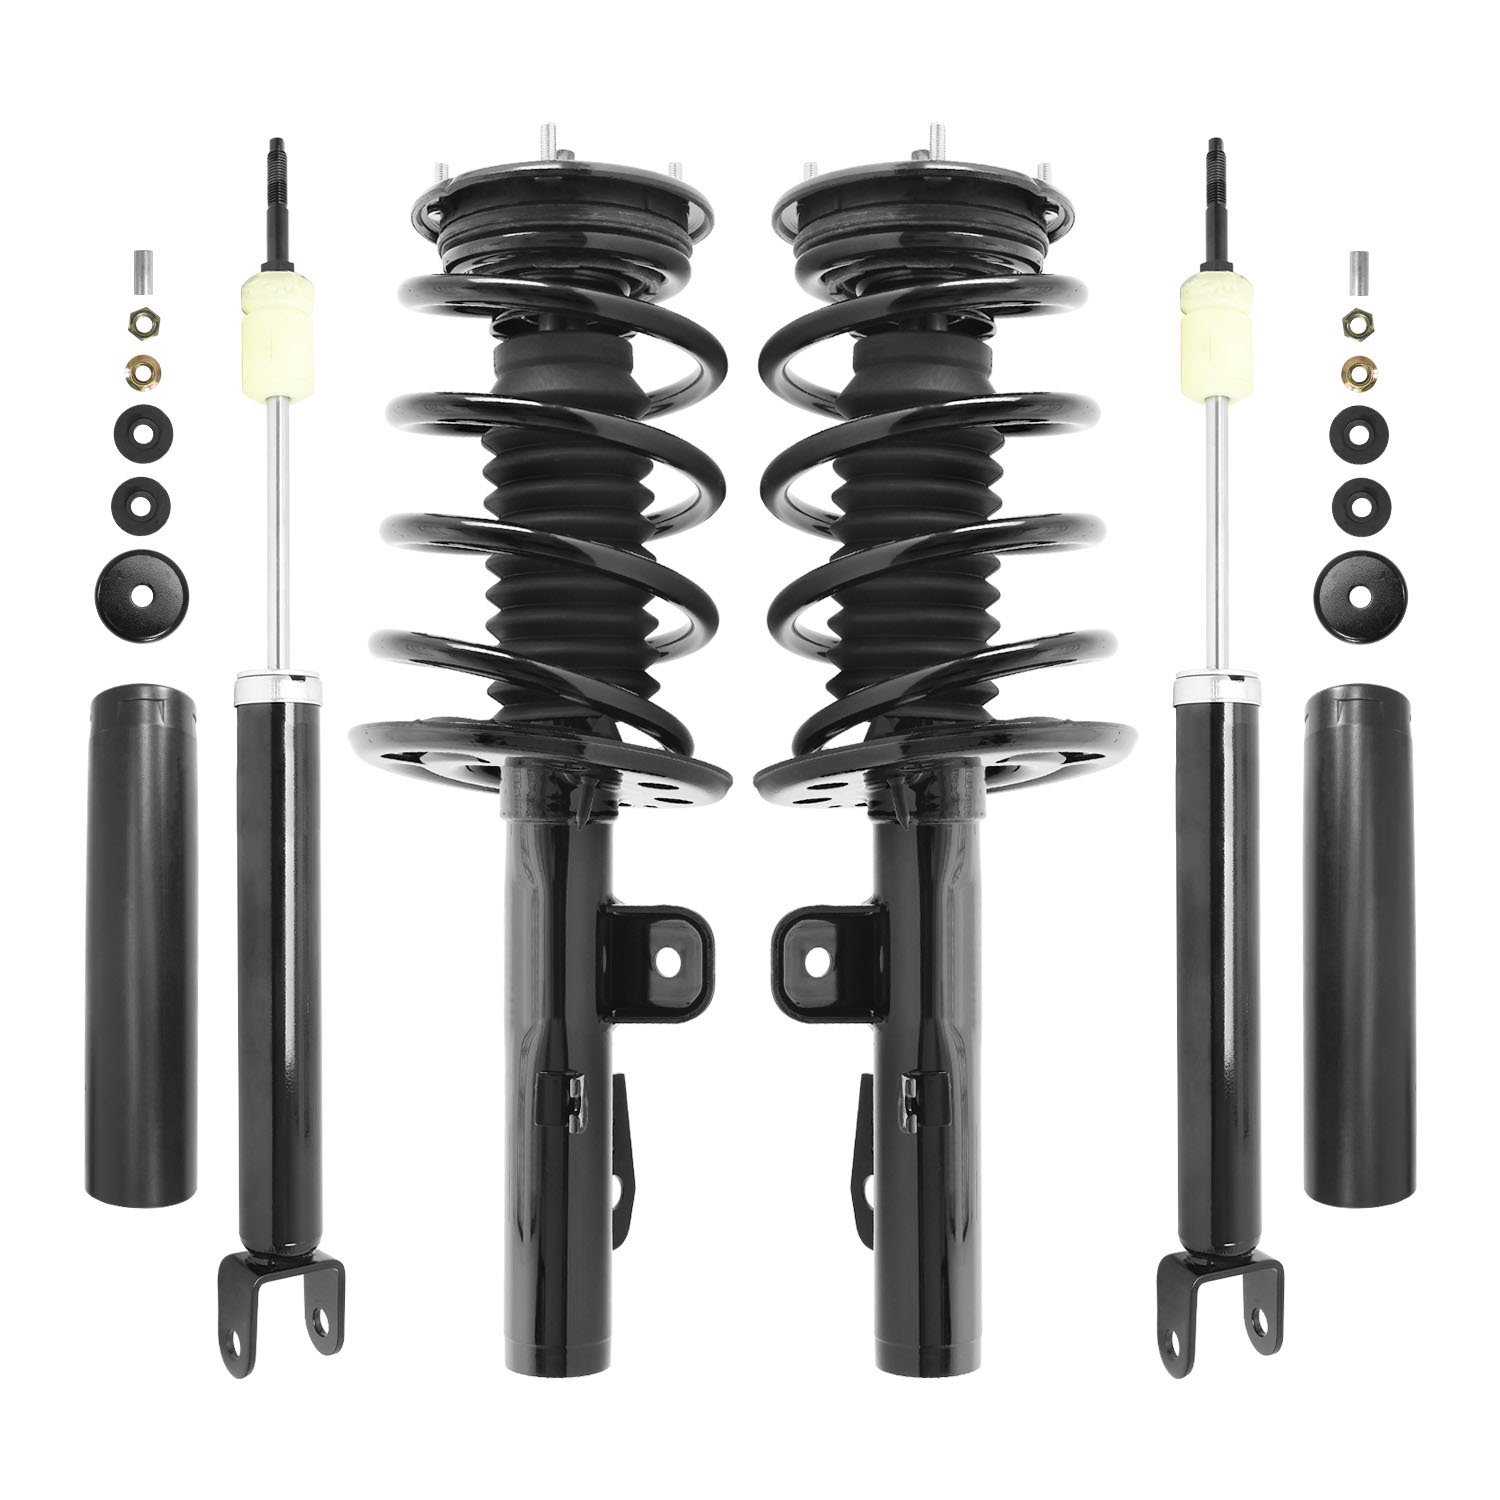 4-11545-252130-001 Front & Rear Suspension Strut & Coil Spring Assembly Fits Select Ford Taurus